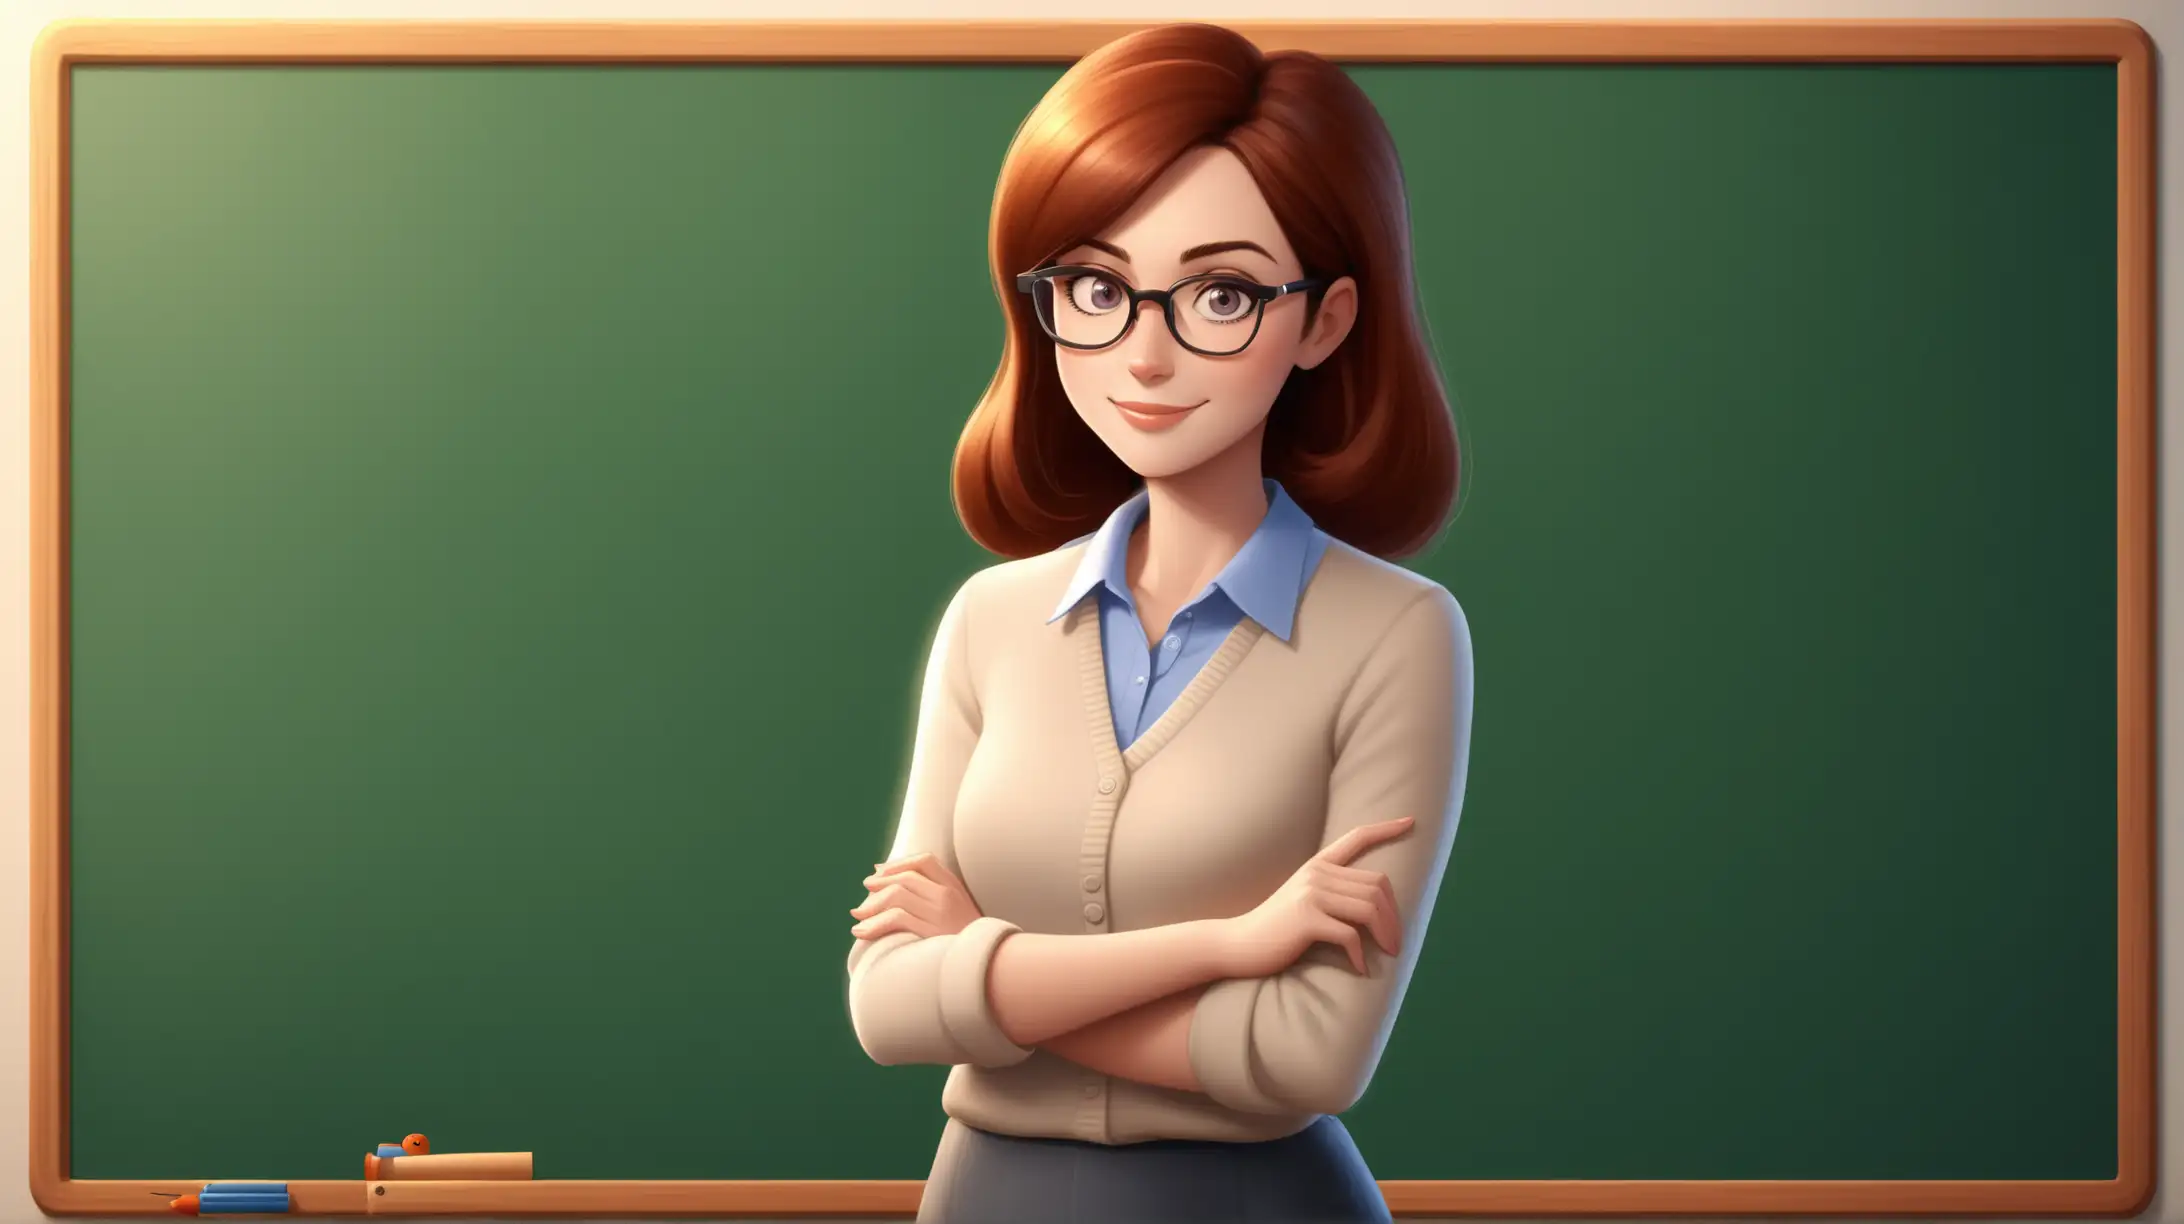 A GORGEOUS PIXAR STYLE FEMALE TEACHER,  IN FRONT OF A CLEAN BOARD, WEARING GLASSES AND A SOFT SMILE, 
